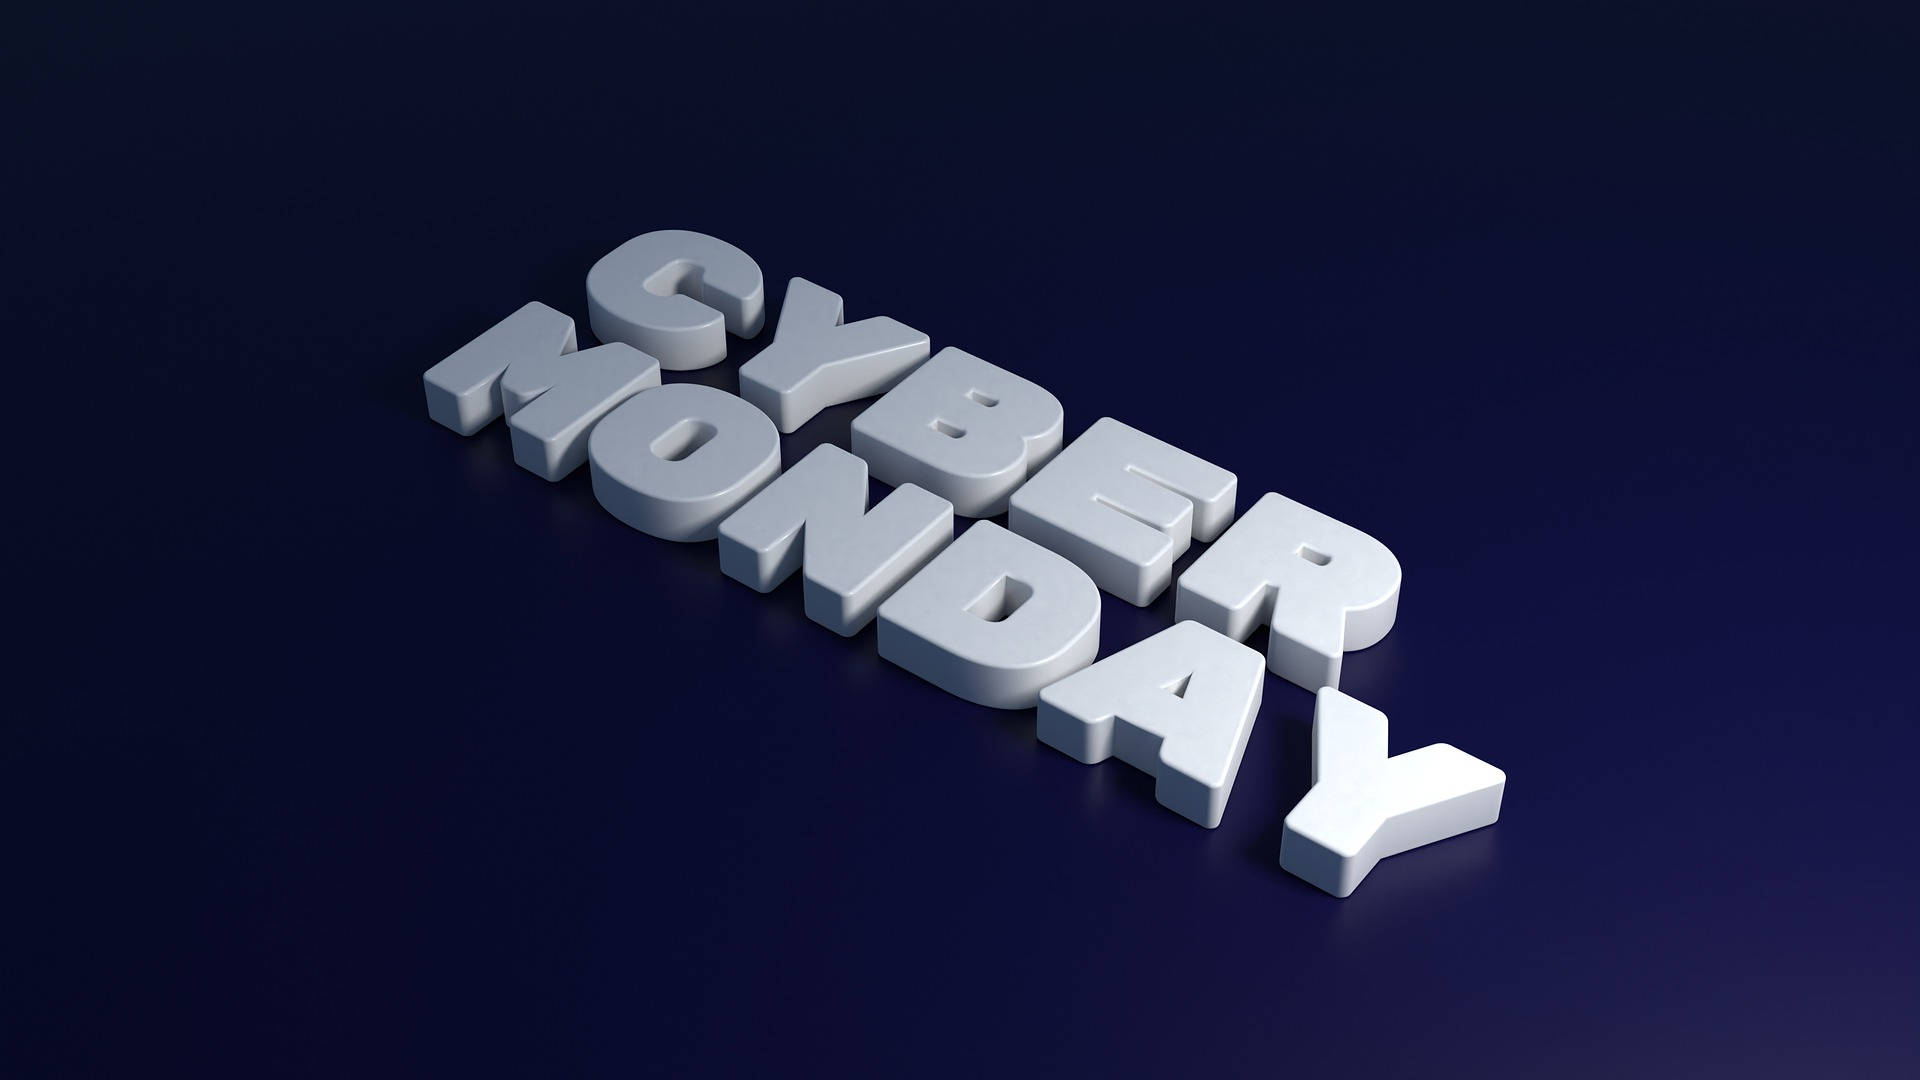 Cyber Monday Business Concept Background